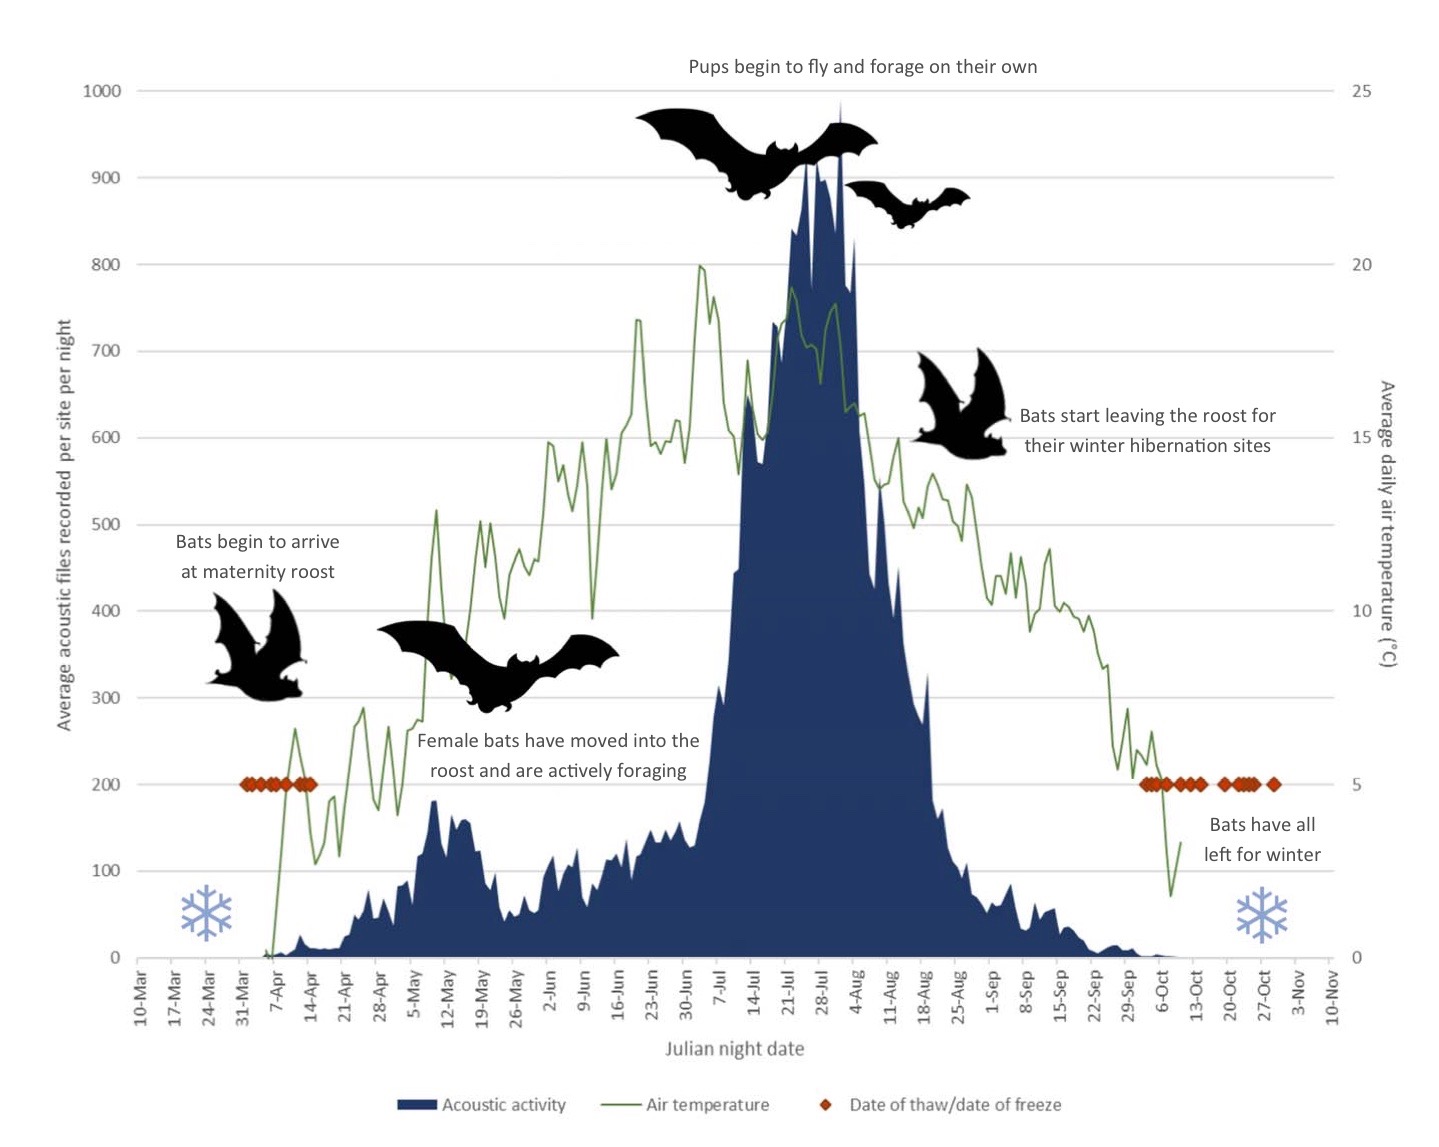 graphic showing the summer activity of little brown bats in northern Alaska